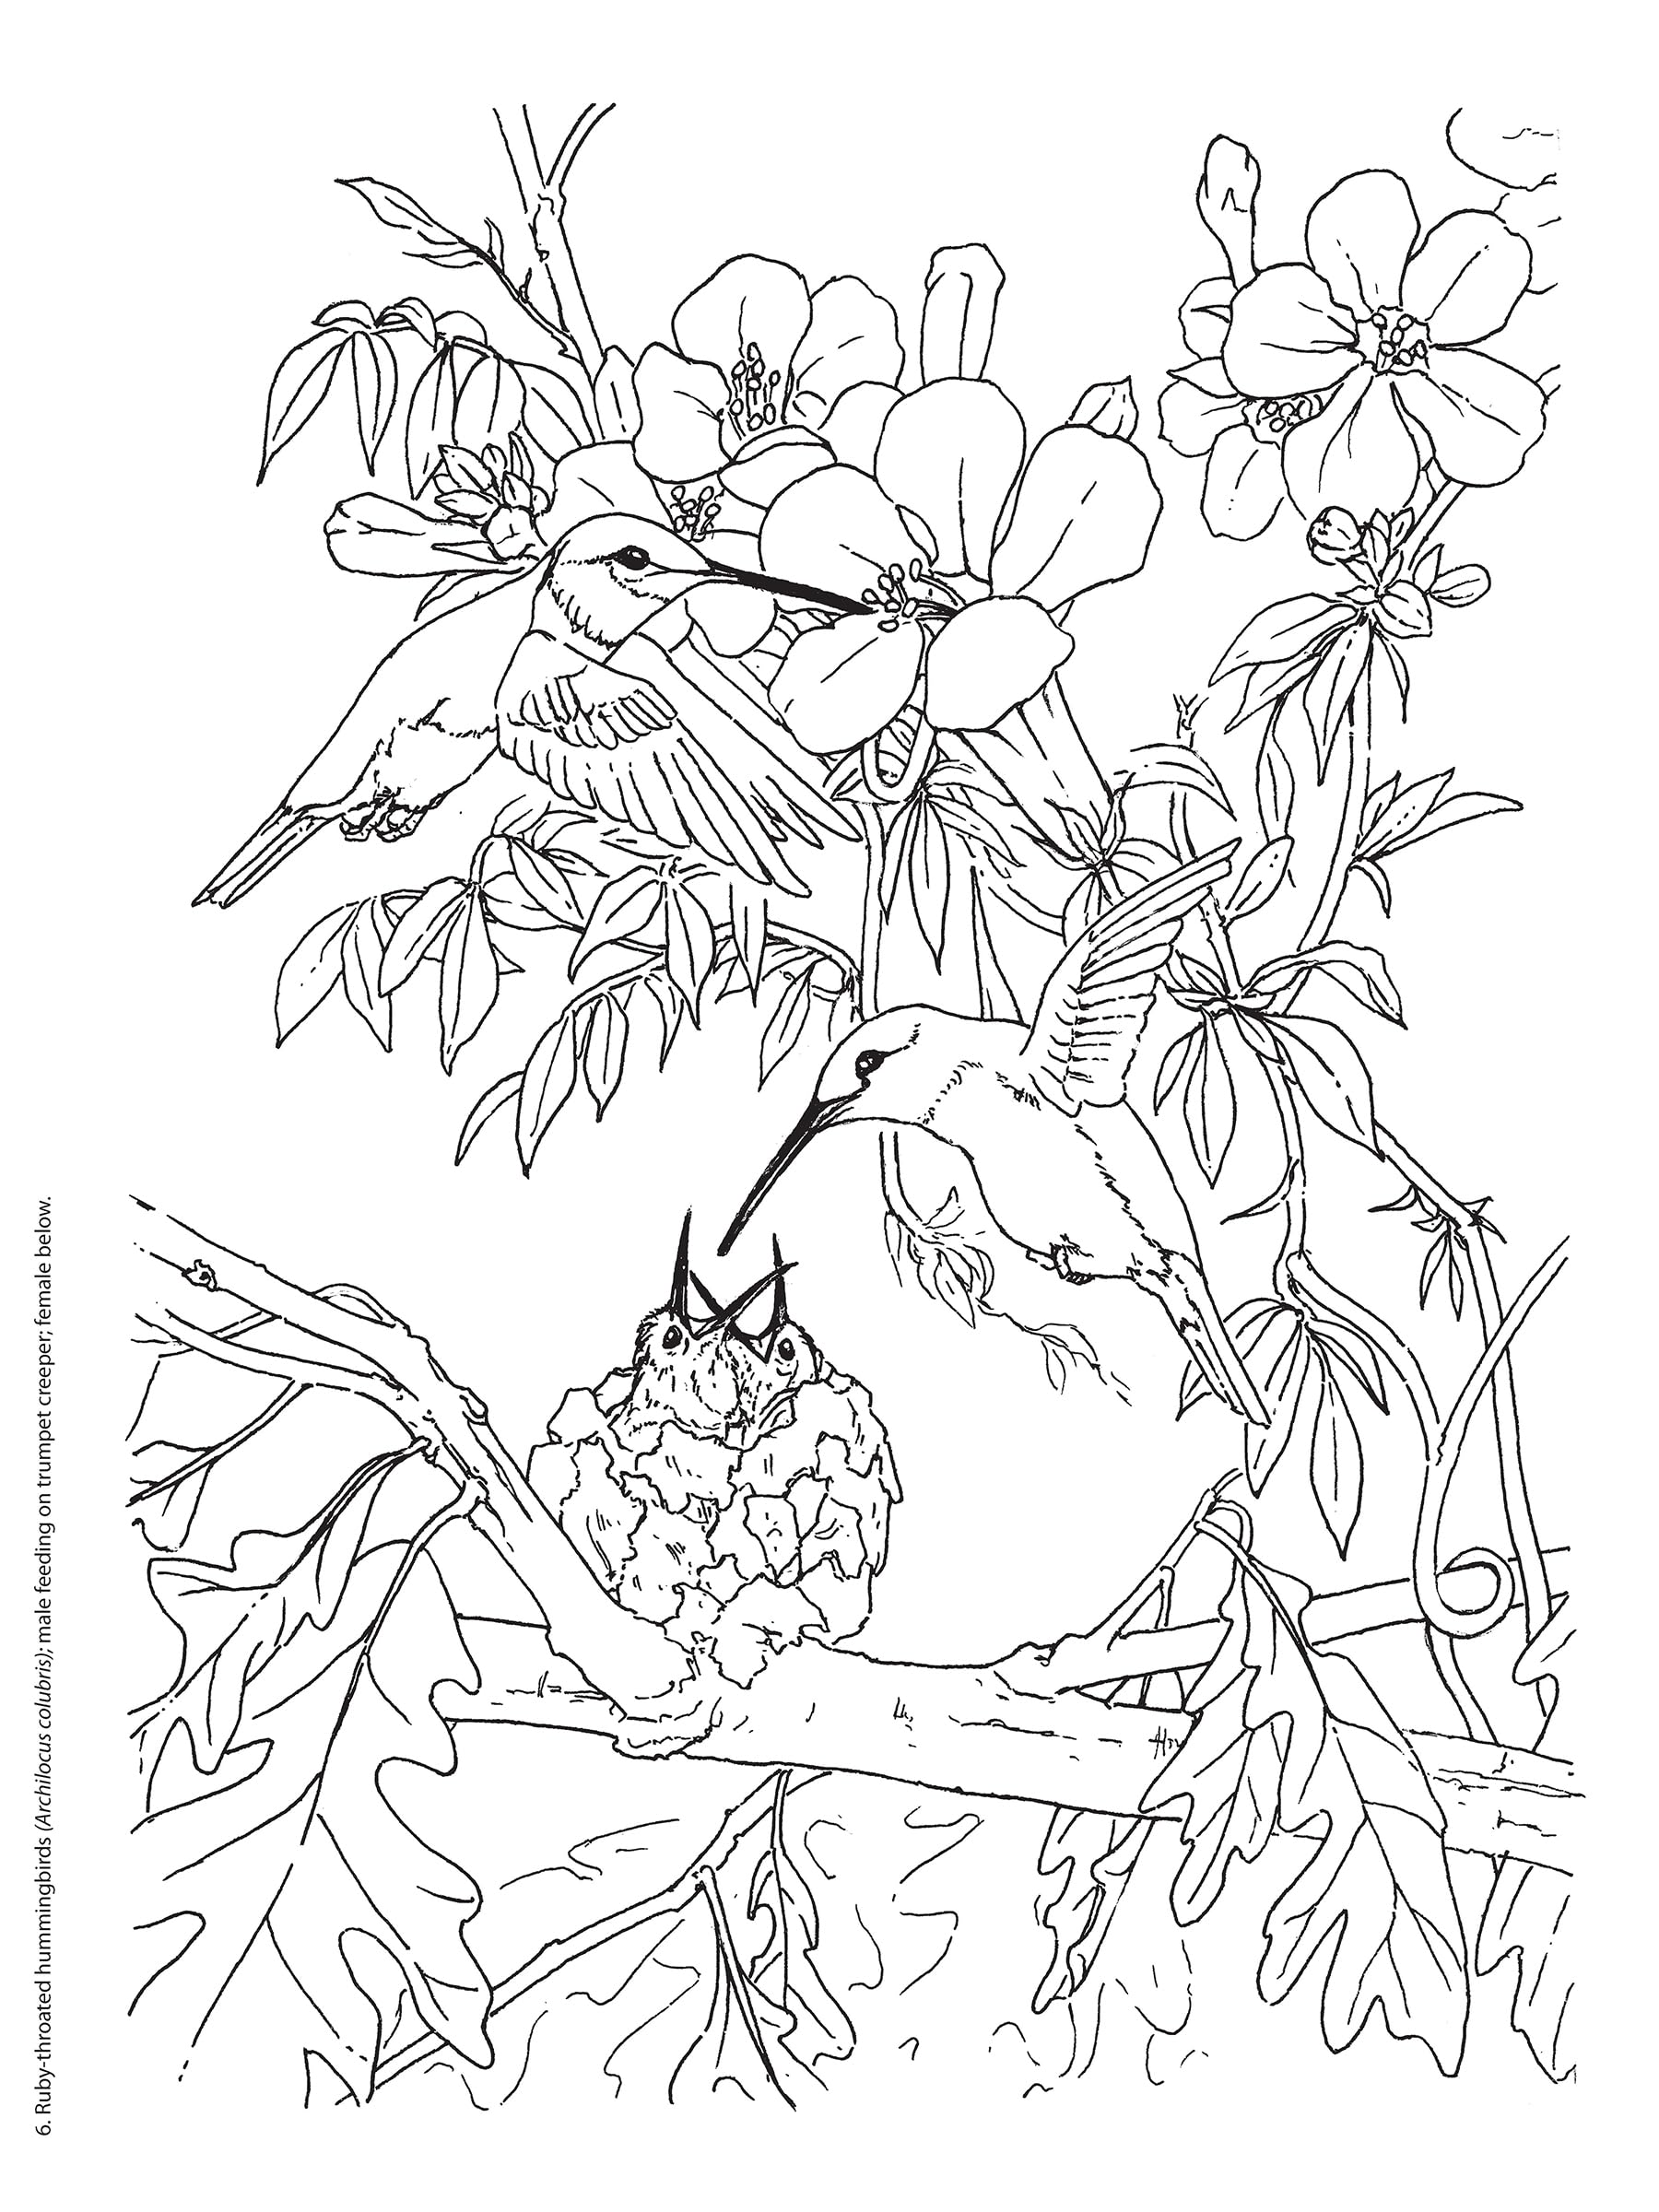 A line drawing of a mother bird feeding her baby bird is shown.